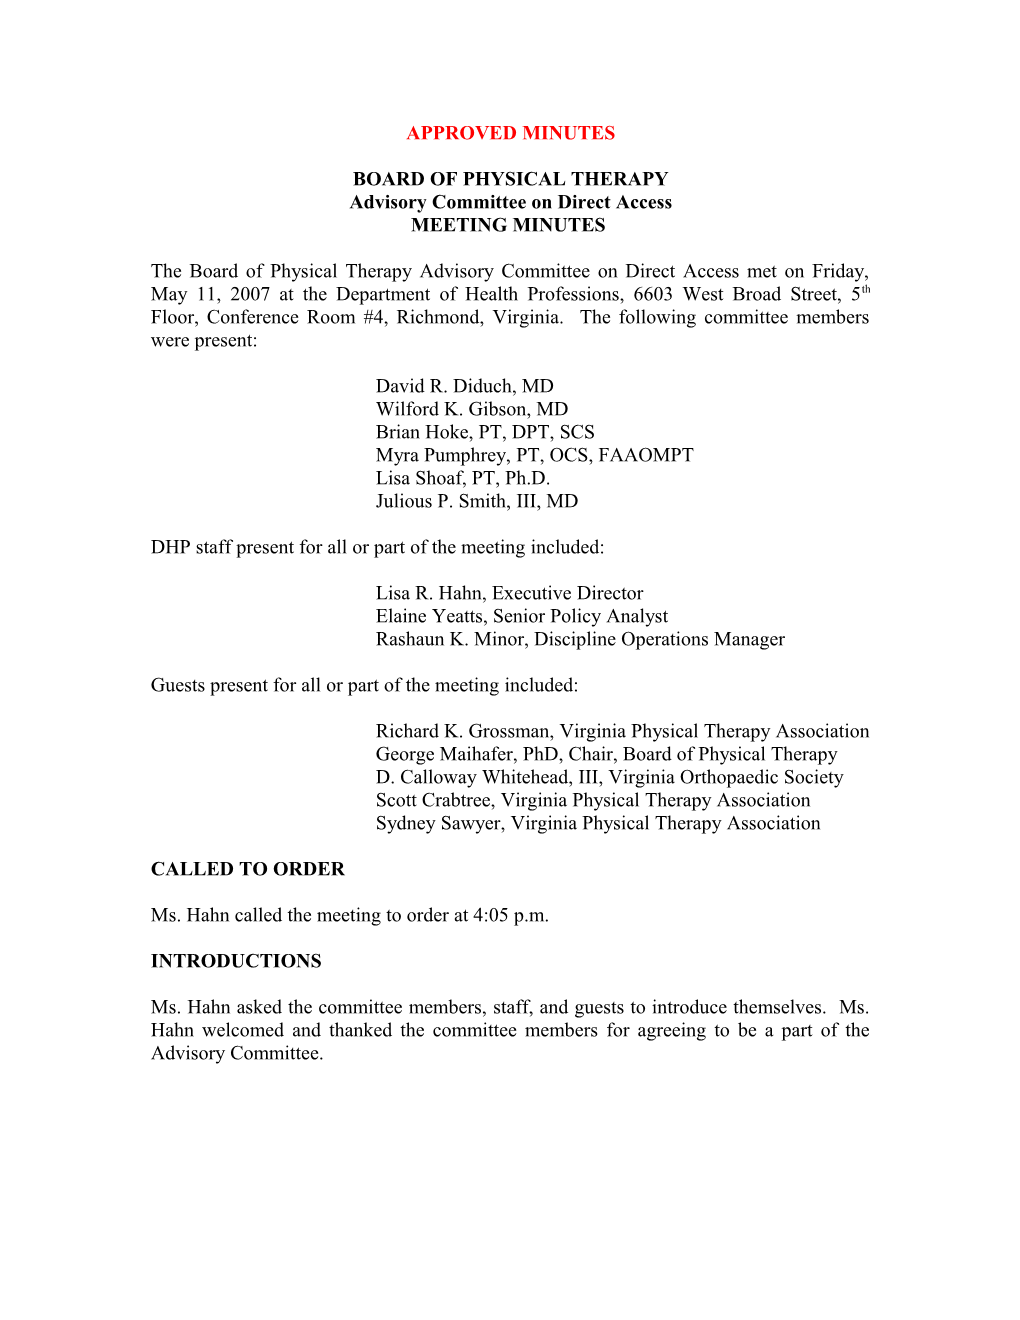 Physical Therapy-Advisory Committee on Direct Access Meeting Minutes-May 11, 2007